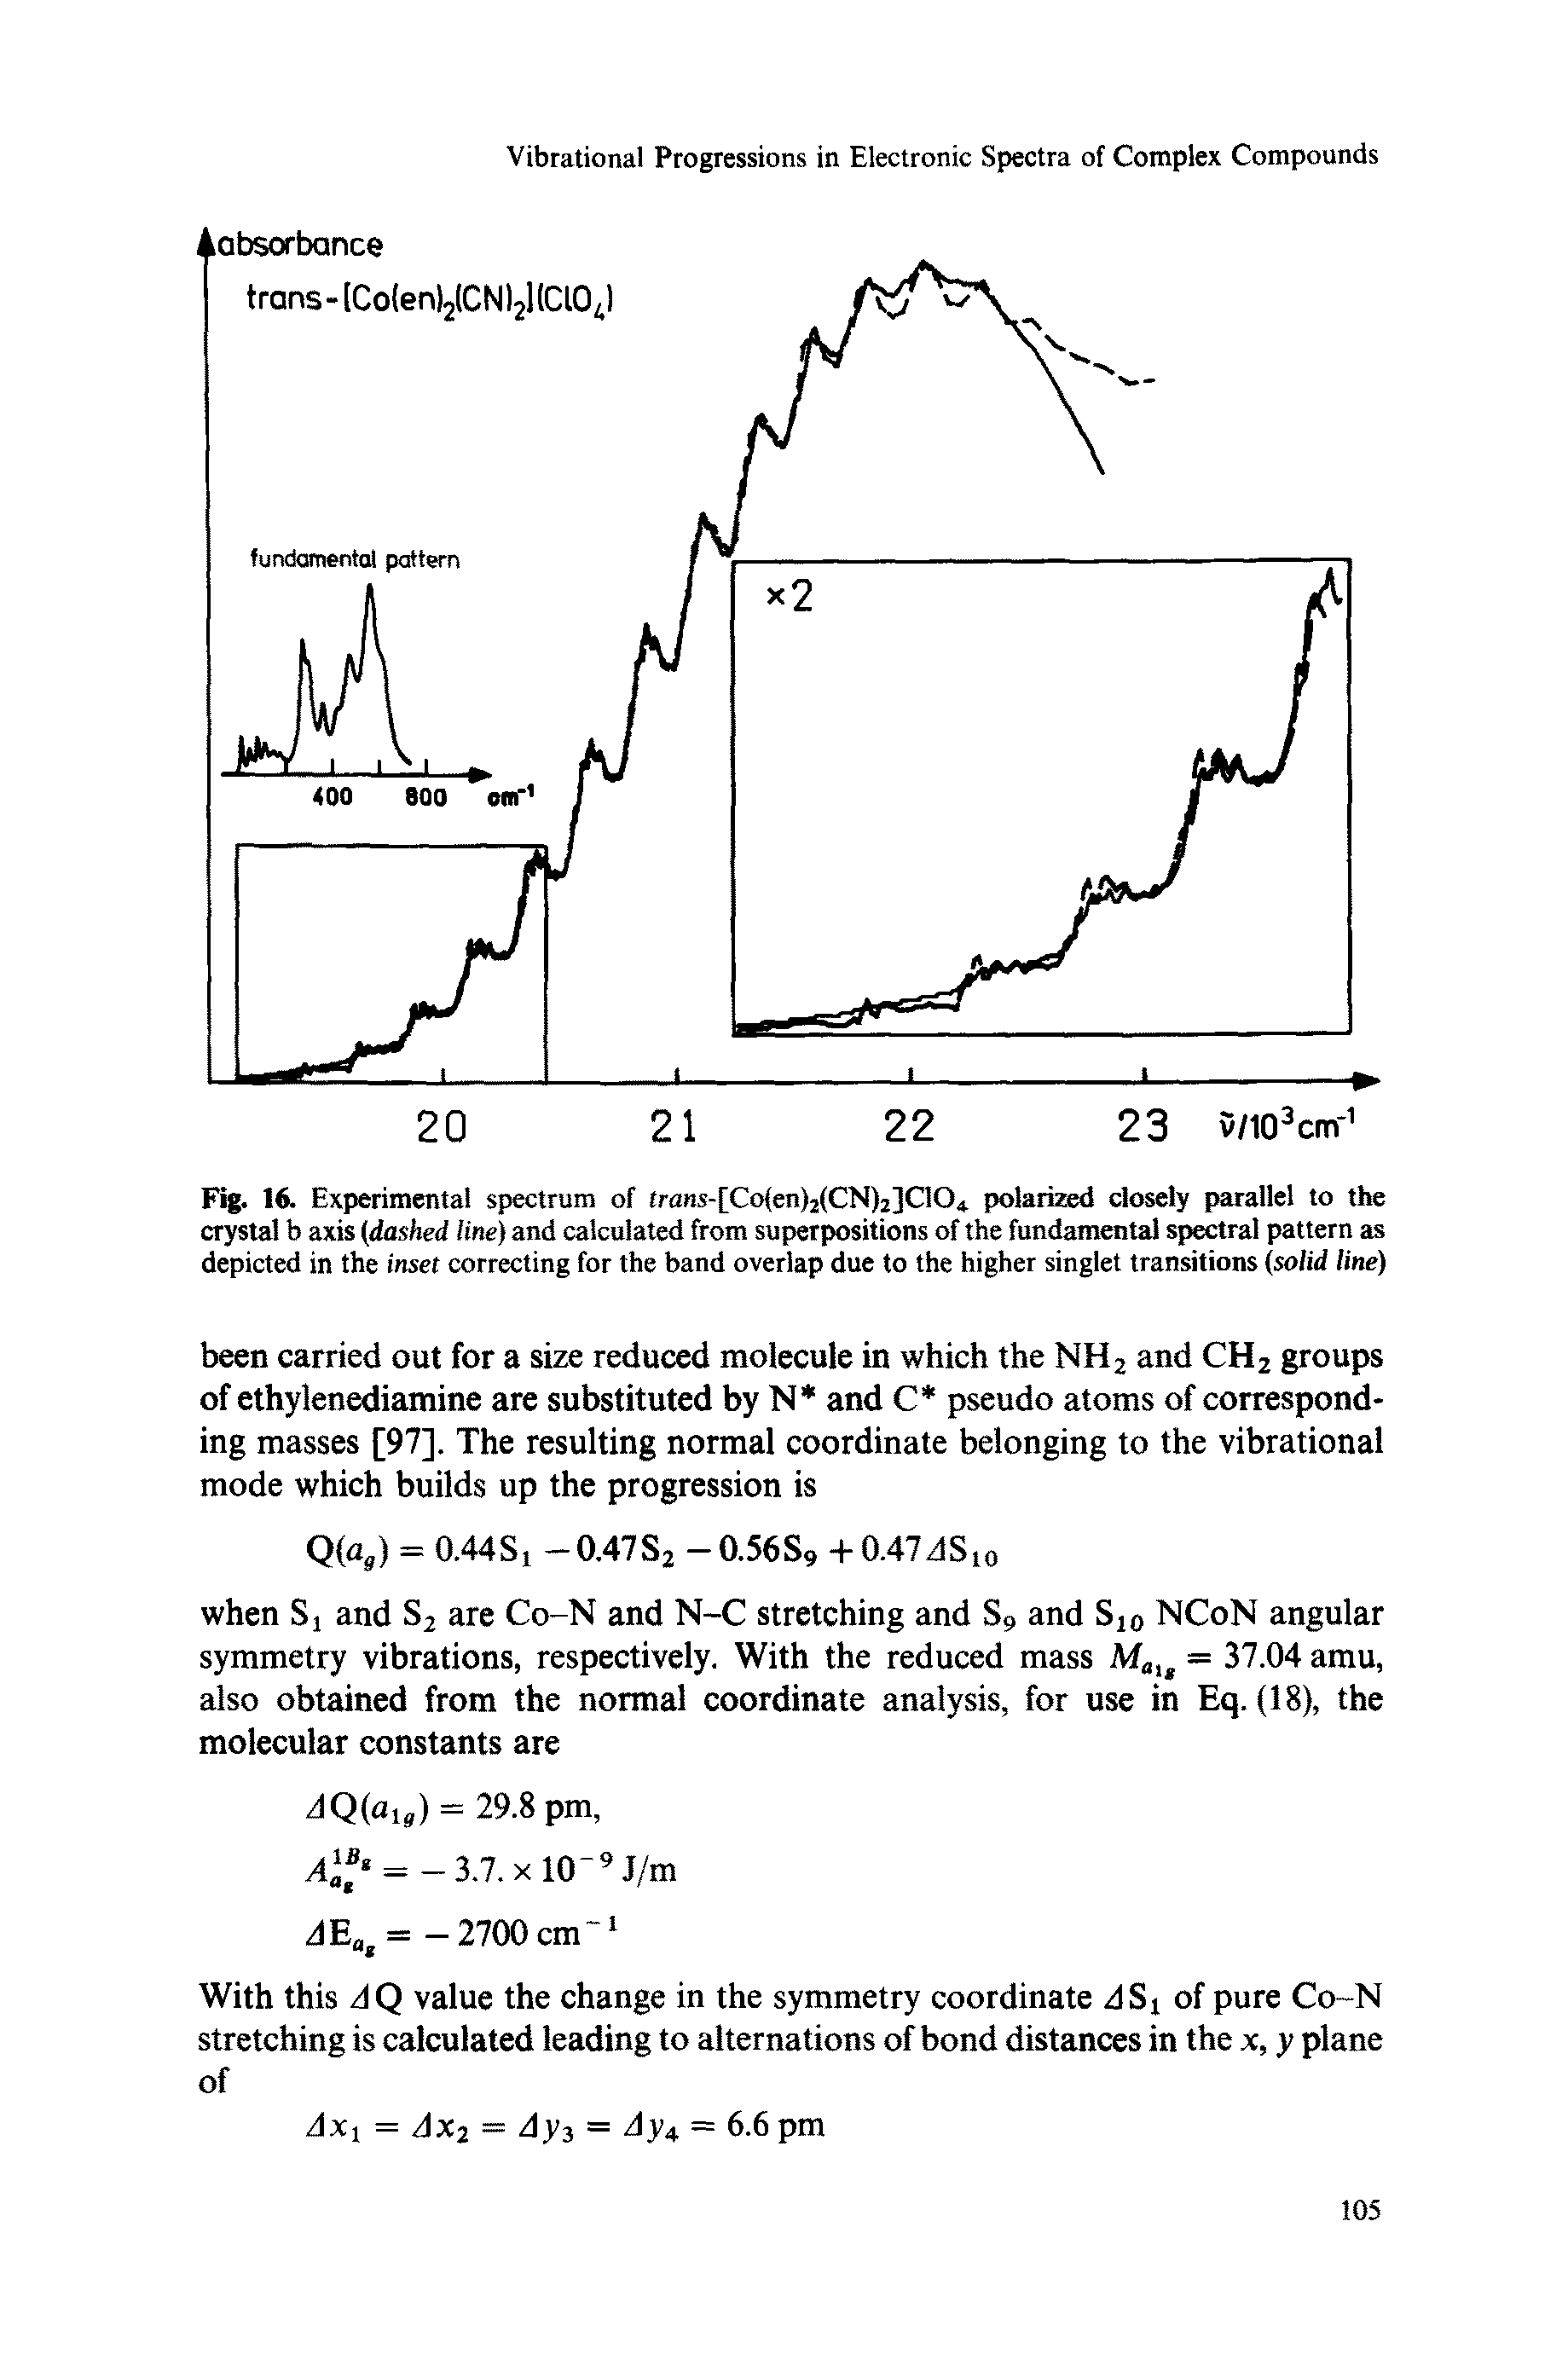 Fig. 16. Experimental spectrum of rans-[Co(en)2(CN)2]C104 polarized closely parallel to the crystal b axis (dashed line) and calculated from superpositions of the fundamental spectral pattern as depicted in the inset correcting for the band overlap due to the higher singlet transitions (solid line)...